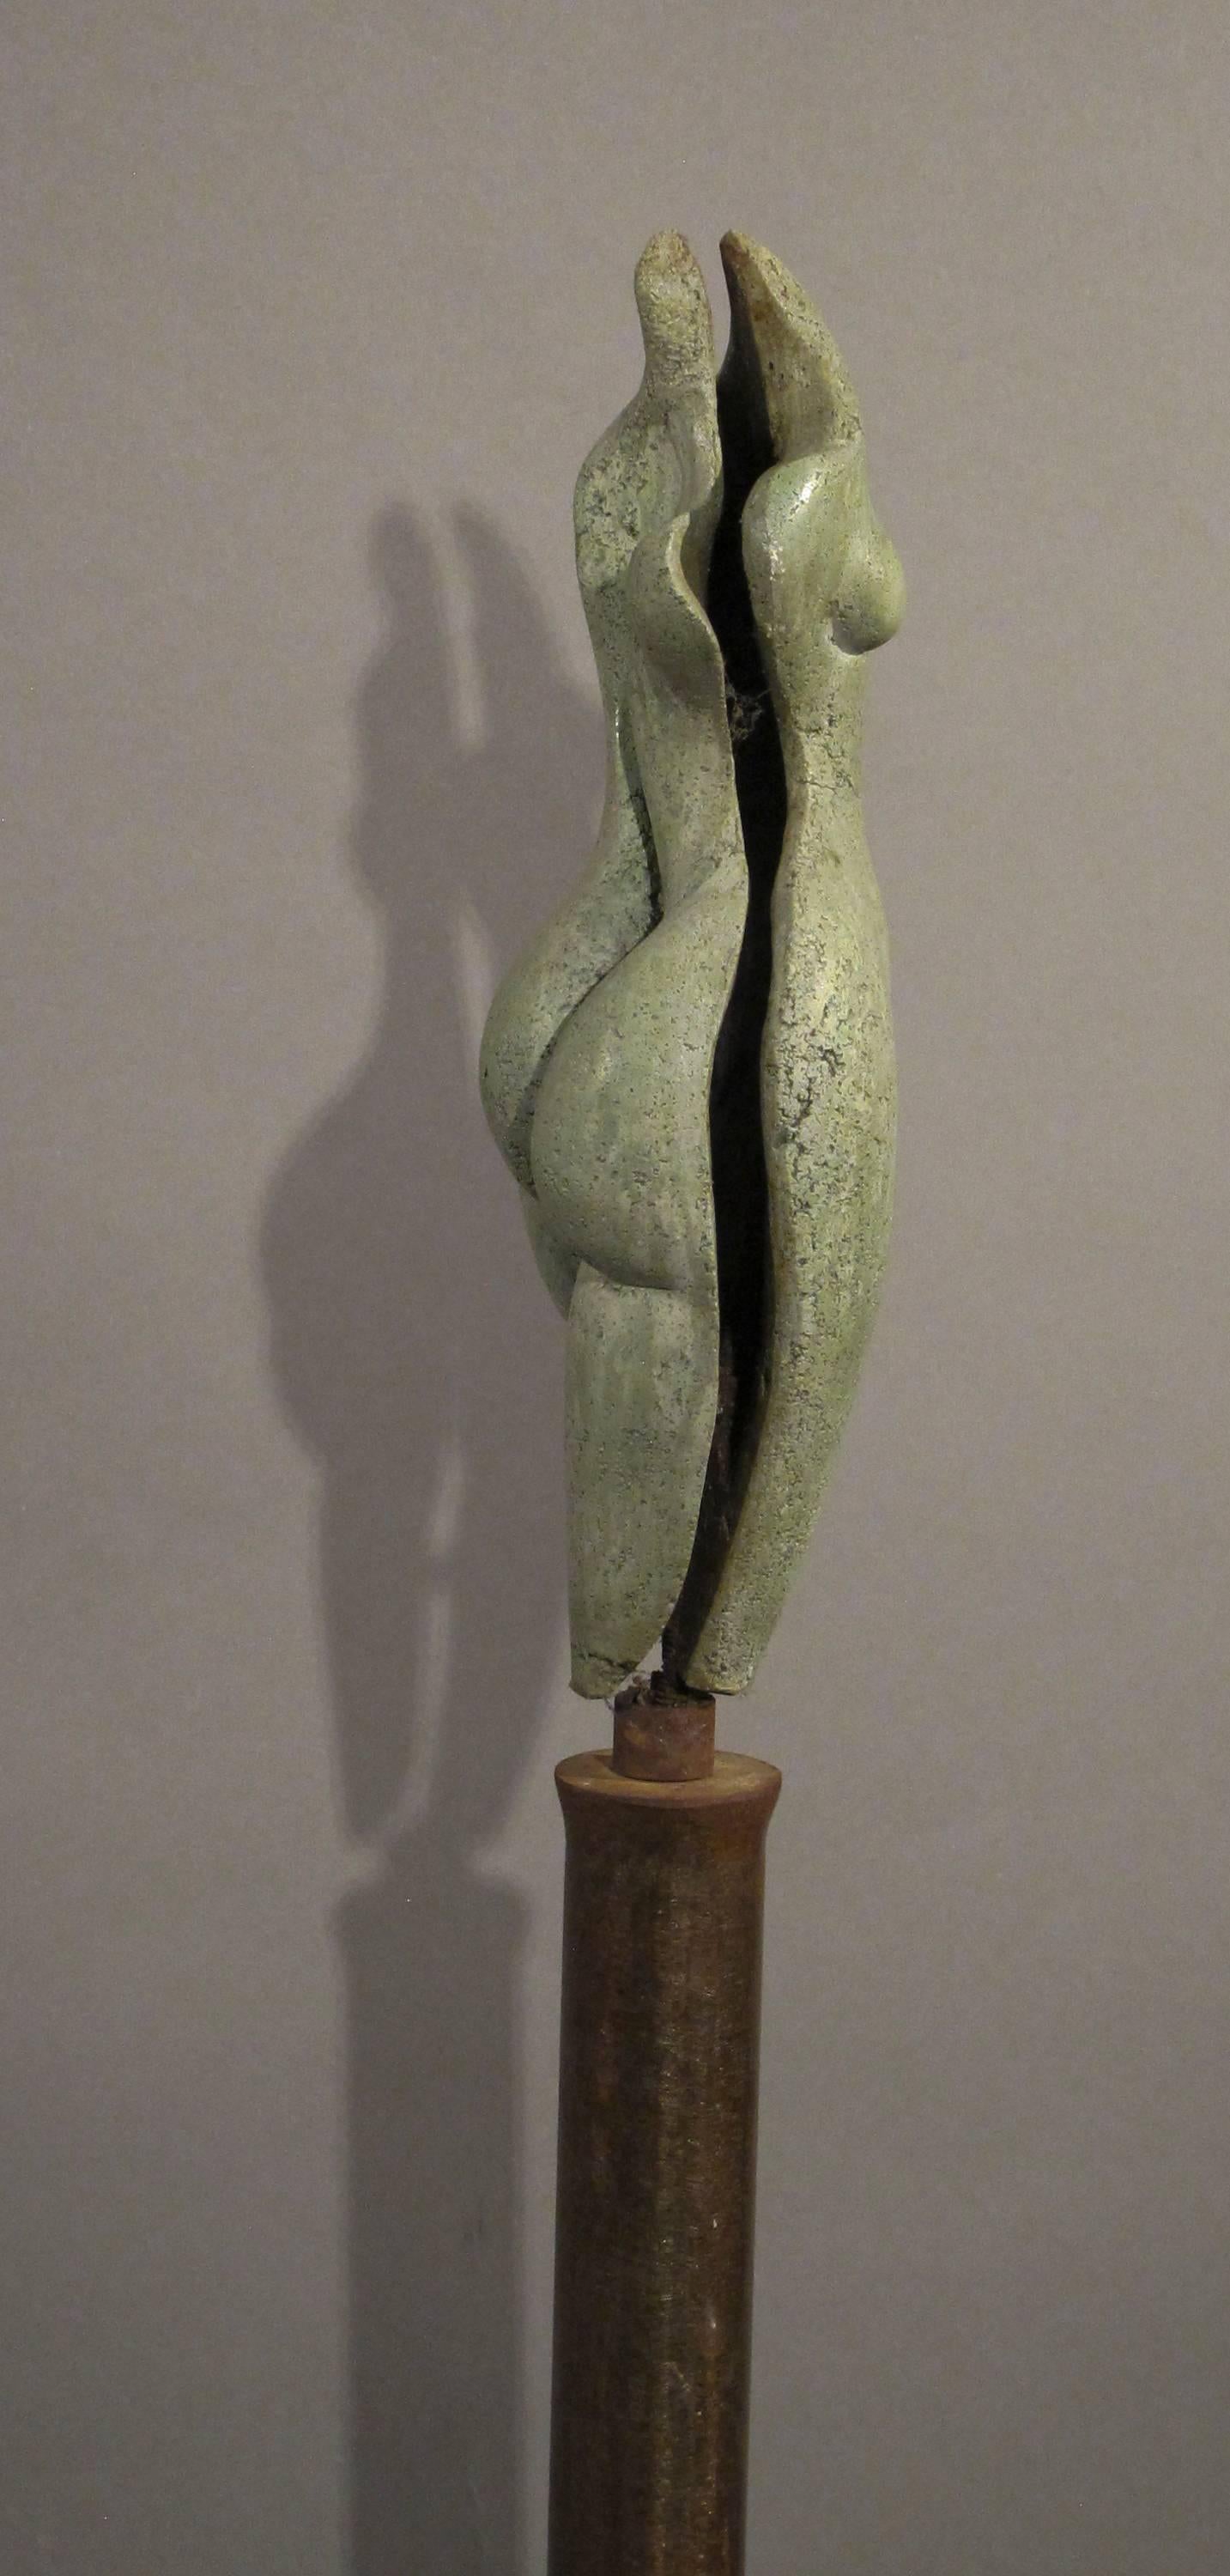 Sunrise, green concrete female nude form on steel column - Contemporary Mixed Media Art by Troy Williams